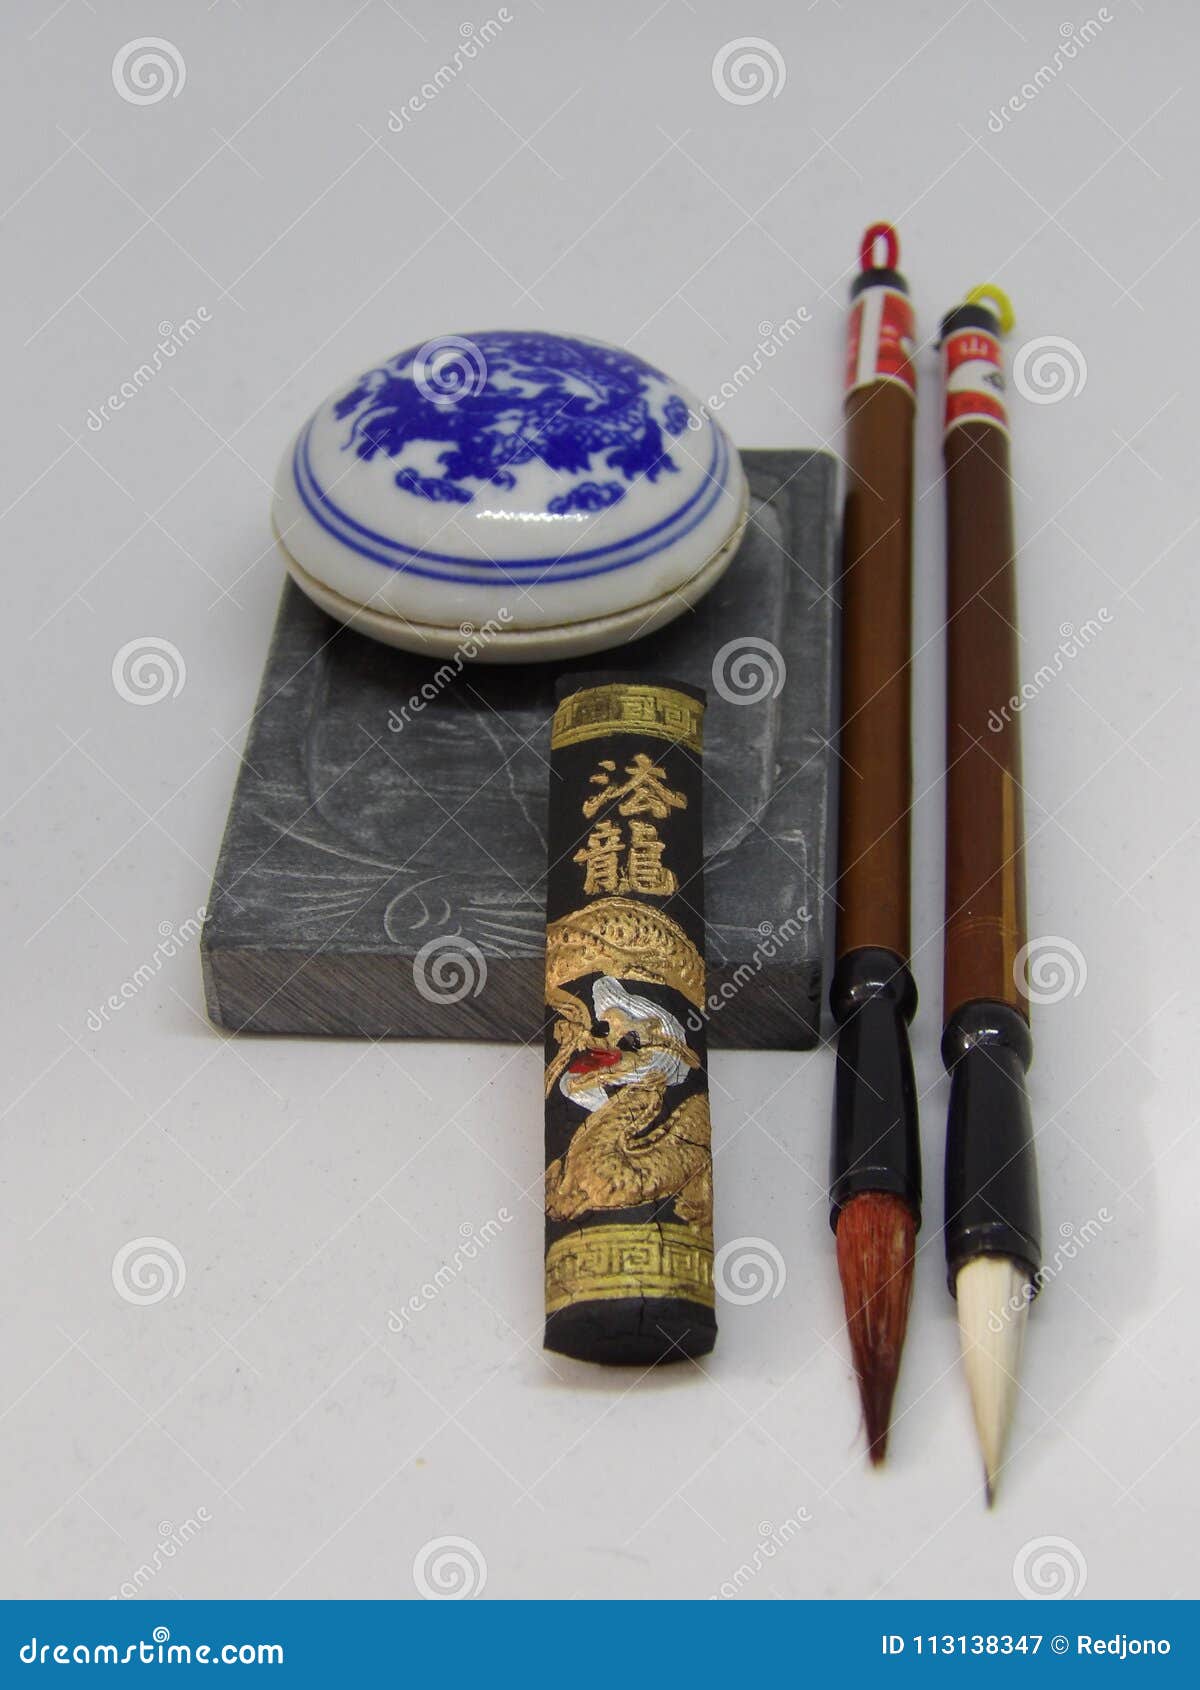 Antique Chinese Calligraphy Set with Stone and Brushes Stock Image - Image  of calligraphy, artwork: 113138347